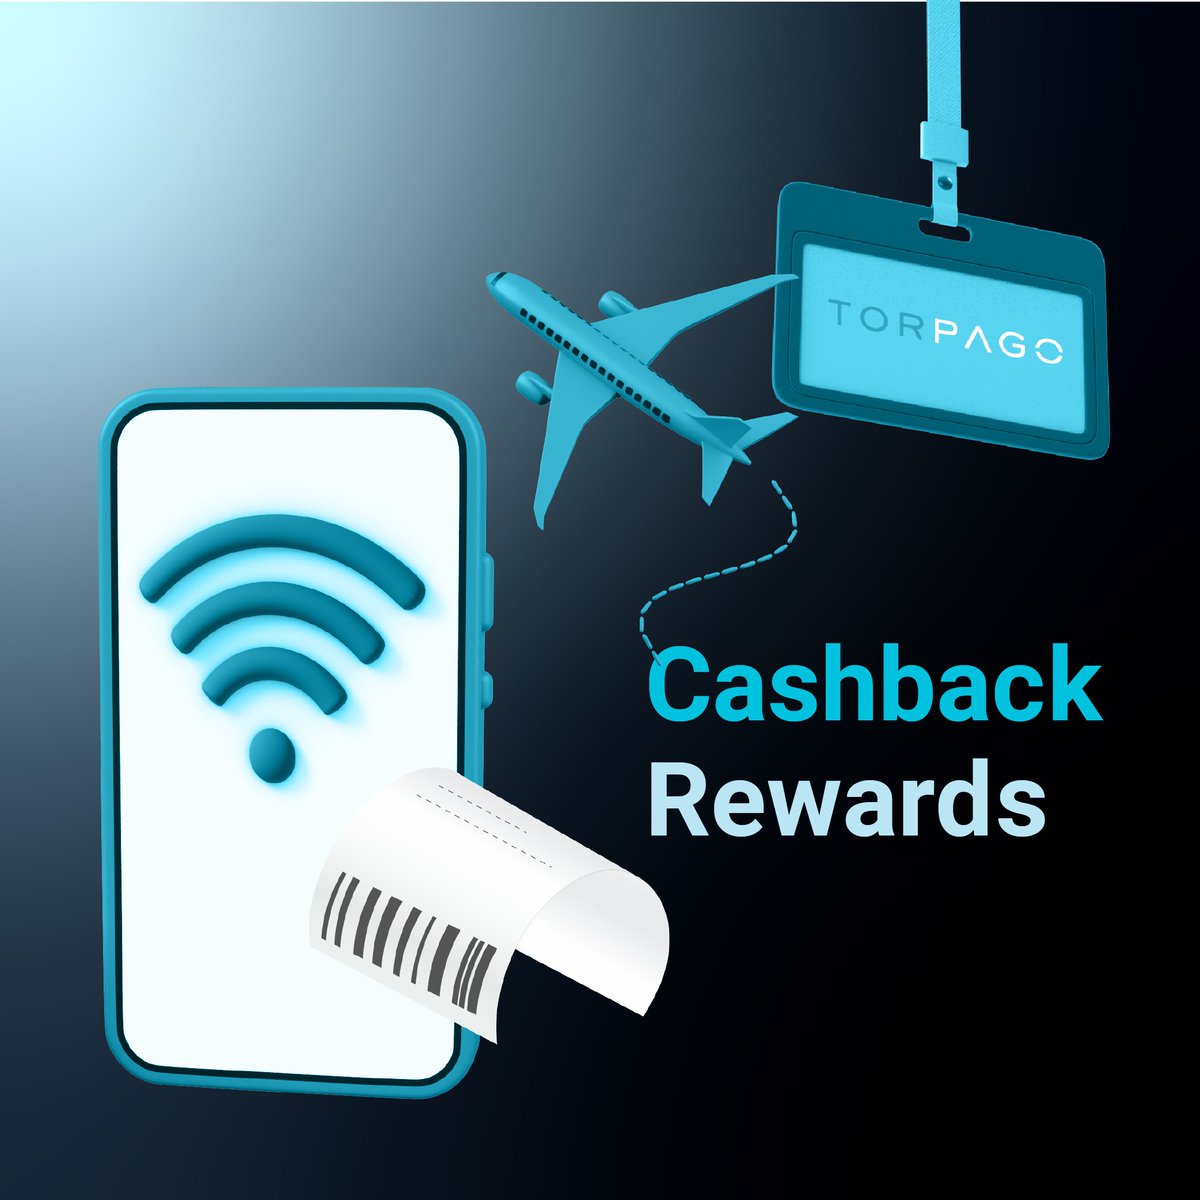 Maximize your summer business travel. ✈️🌴 💸

Here are unique ways for your employees to maximize the 1.25% #cashbackrewards each time they swipe their #corporatecard. Reinvest these rewards back into your business. 🙌

#SpendManagement #CorporateTravel #TorpagoTipTuesdays